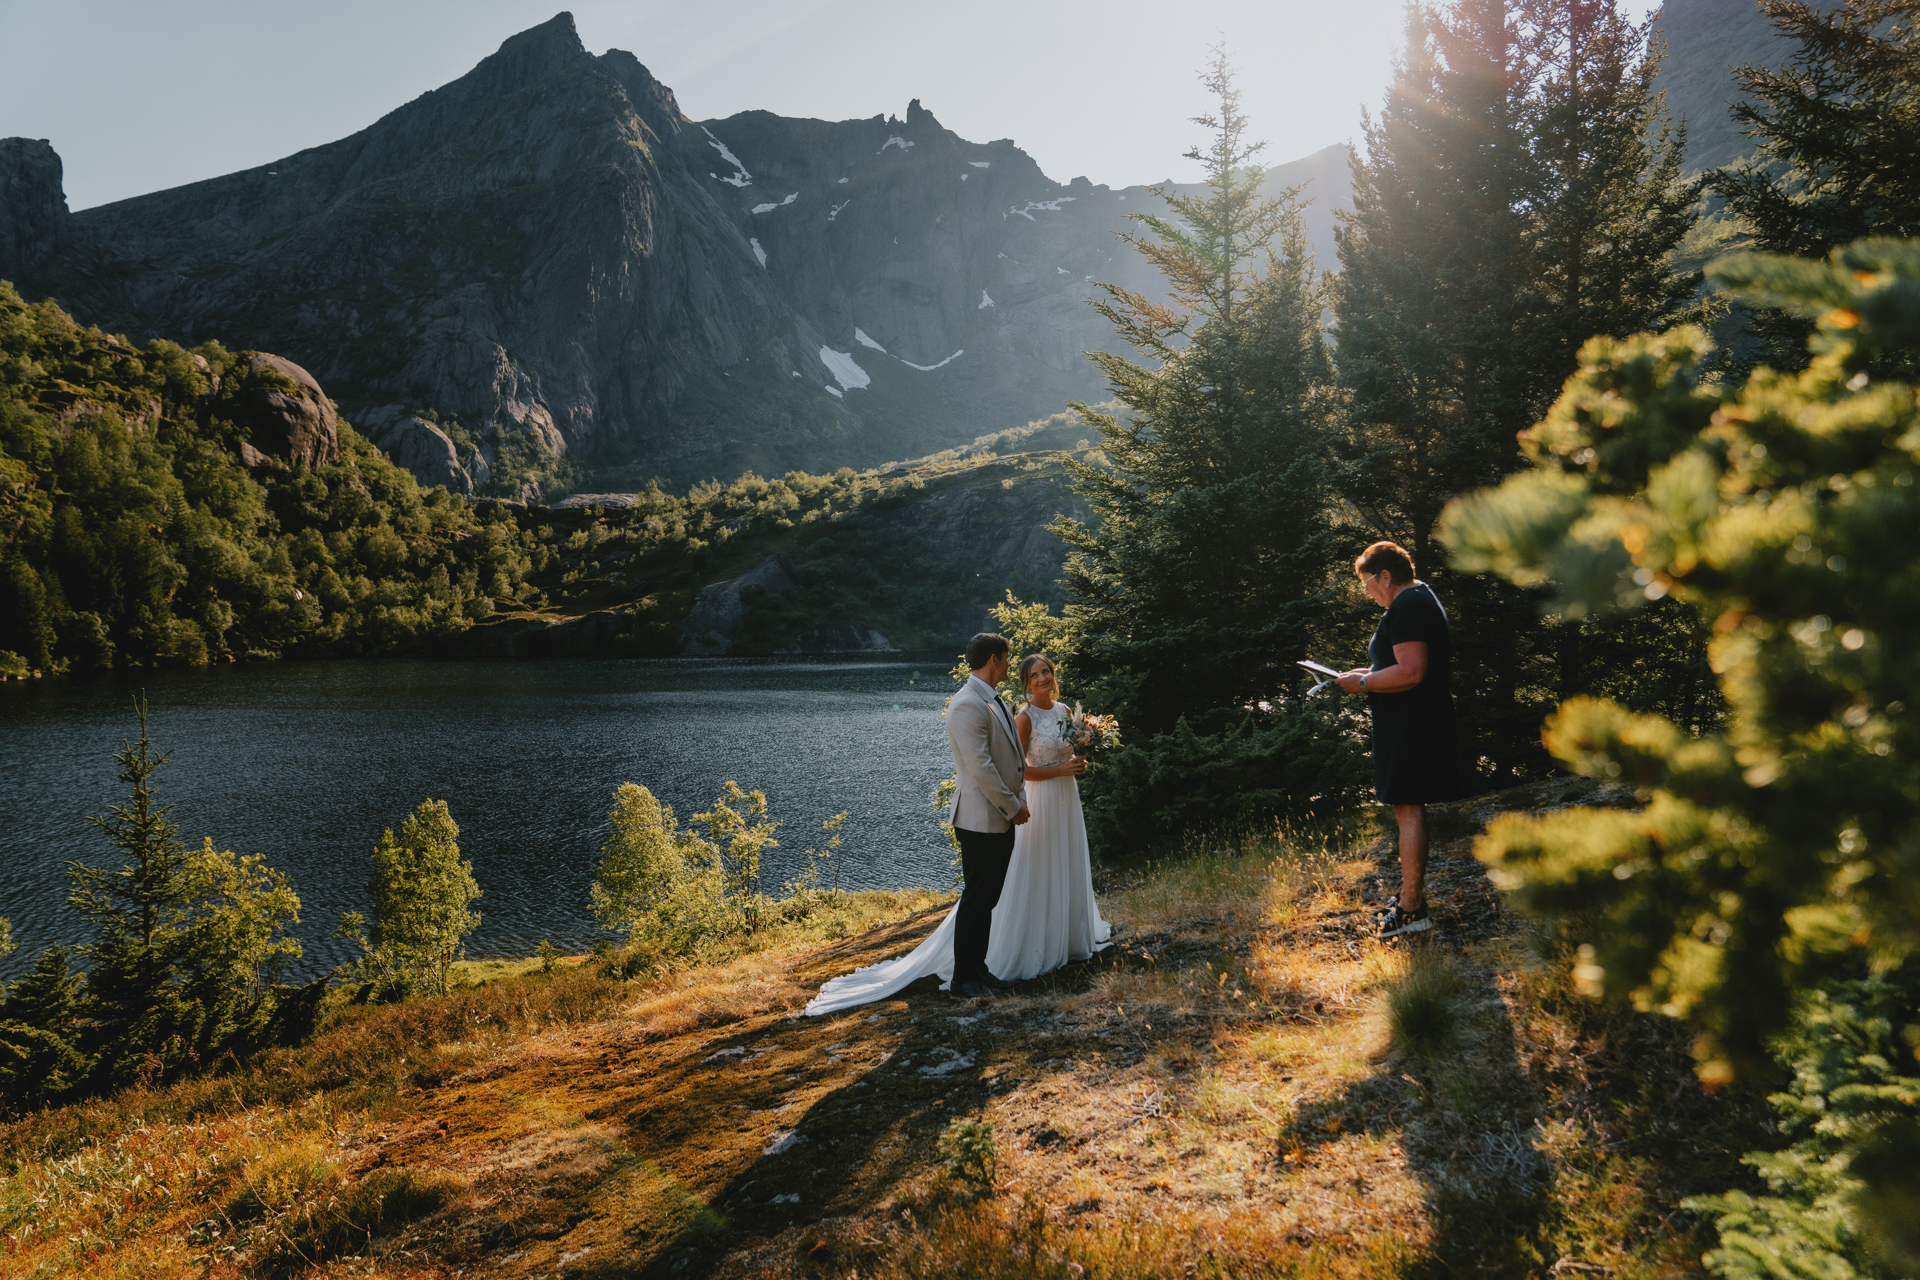 Elopement ceremony - by Christin Eide Photography